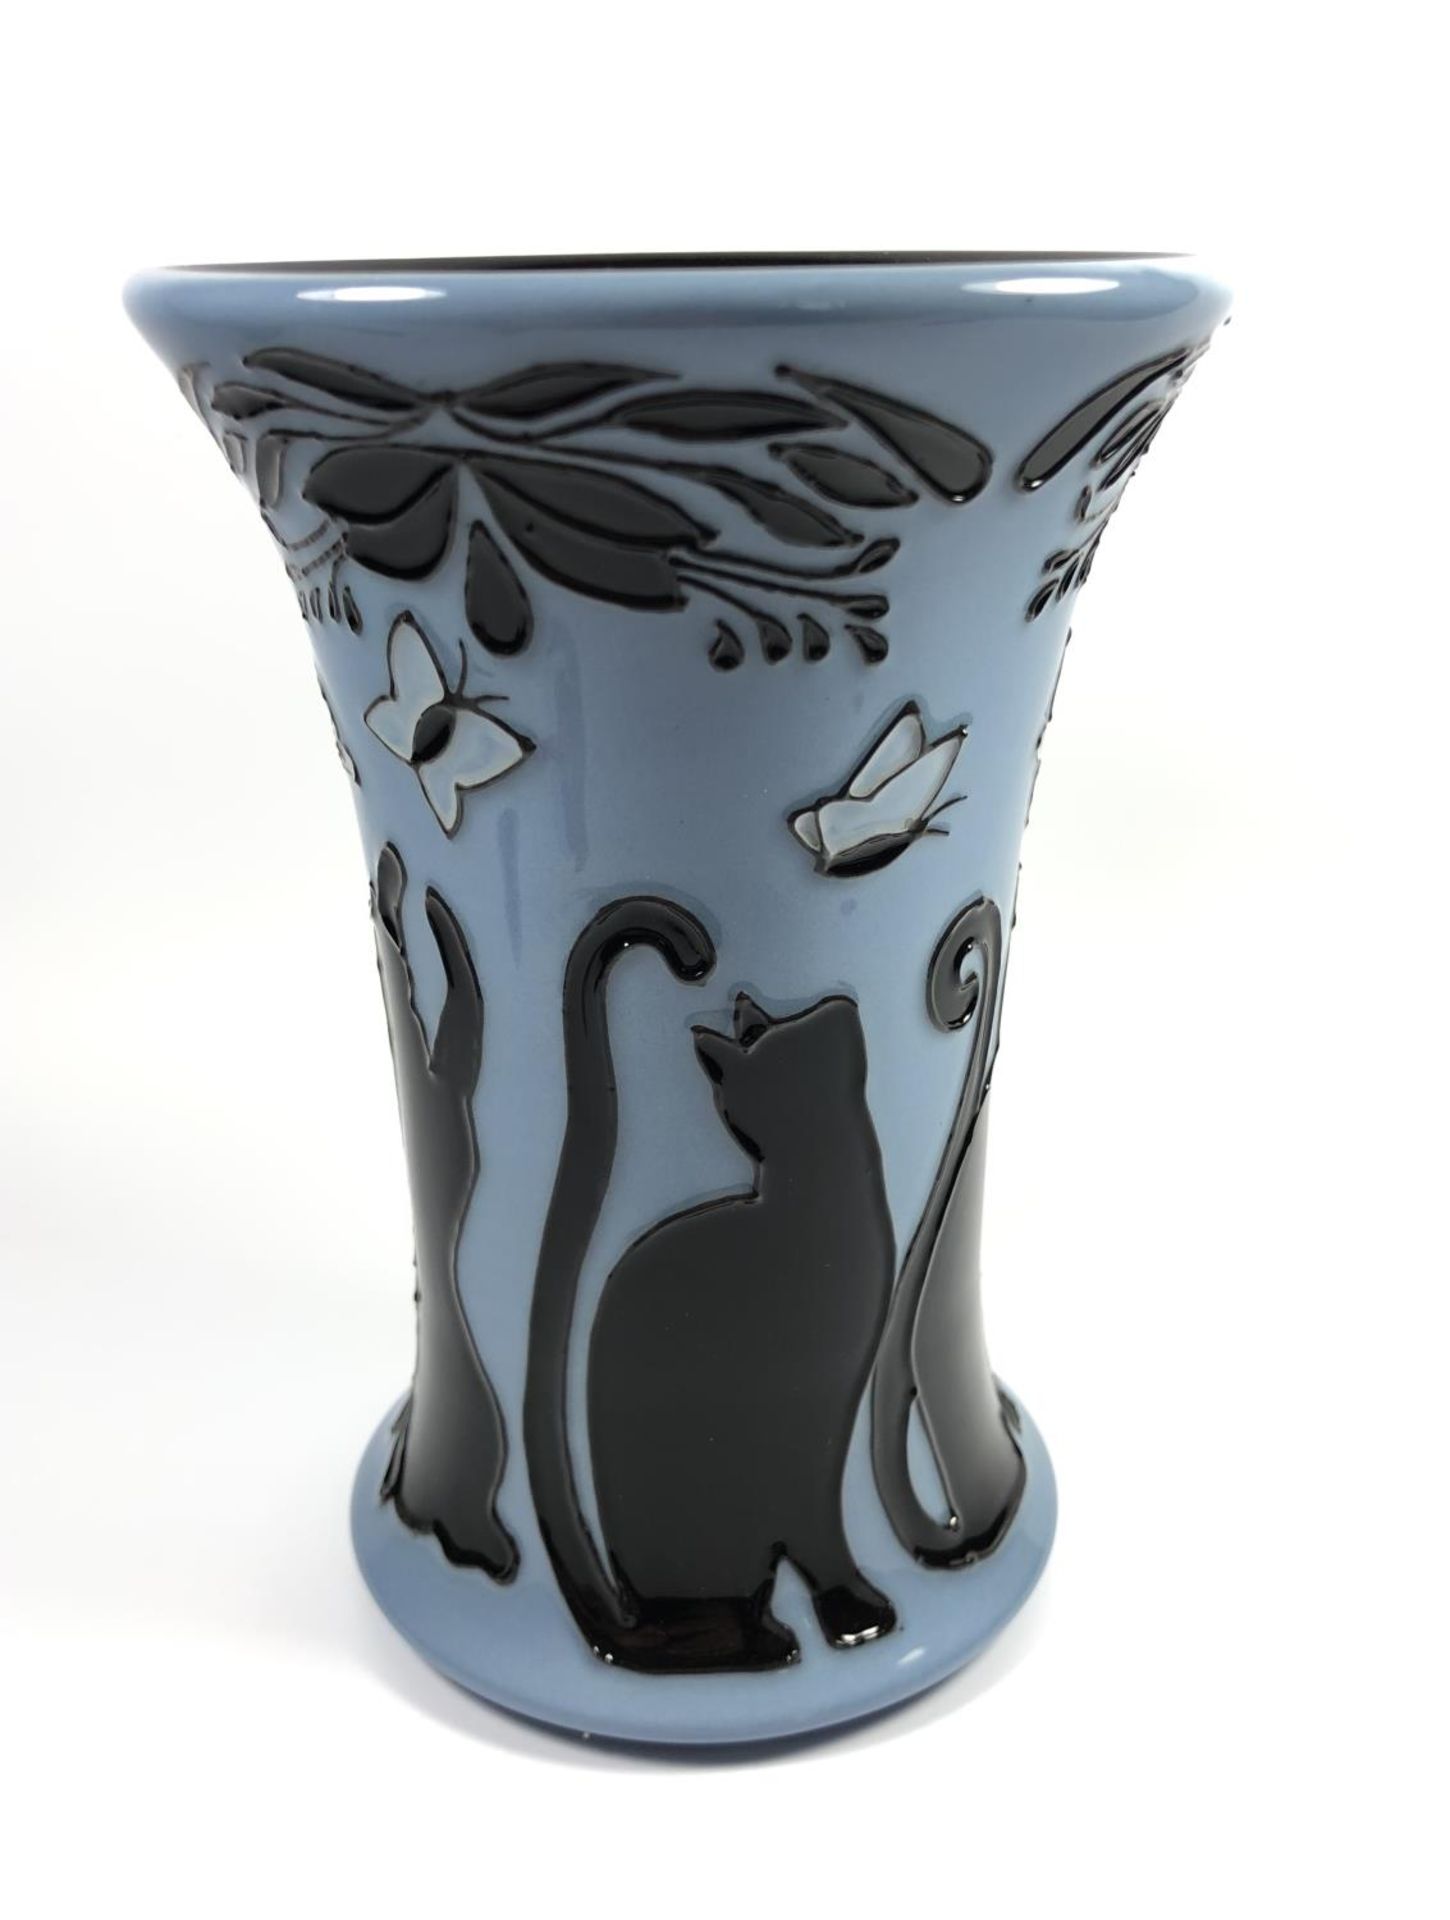 A MOORCROFT POTTERY 'LUCKY BLACK CATS' NUMBERED EDITION VASE (624), HEIGHT 15CM